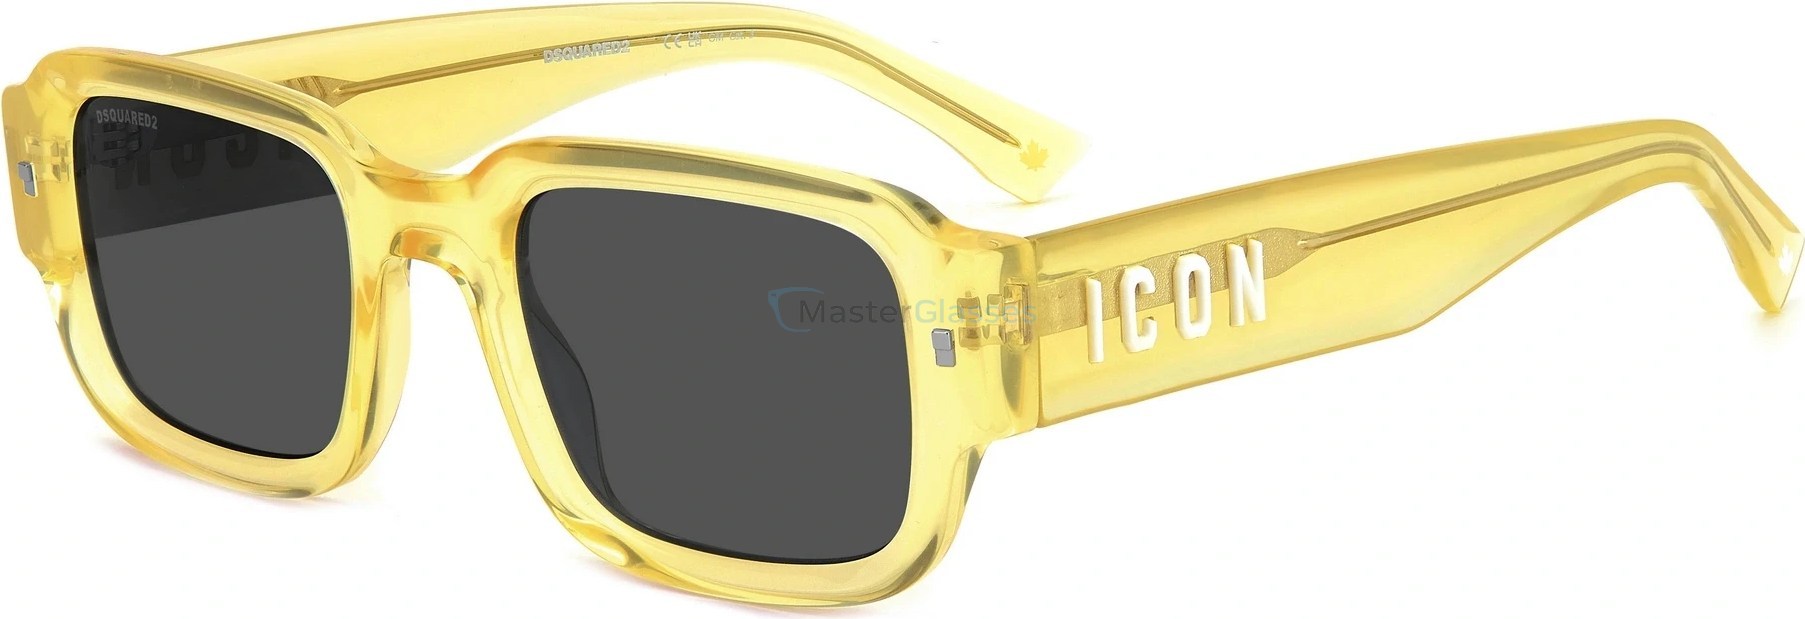   DSQUARED2 ICON 0009/S 40G Yellow